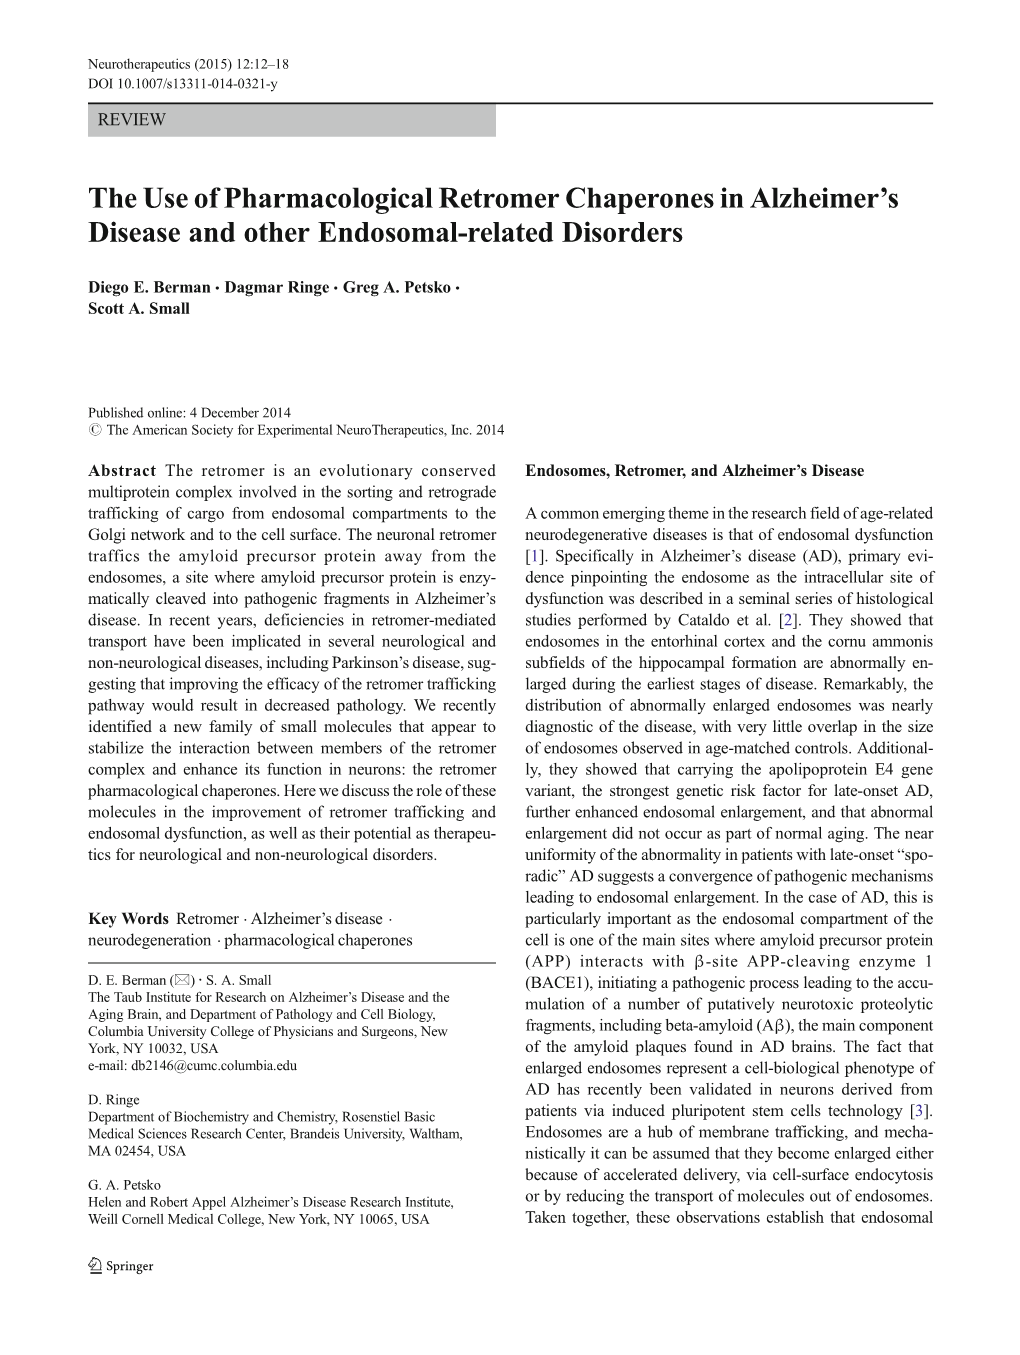 The Use of Pharmacological Retromer Chaperones in Alzheimer's